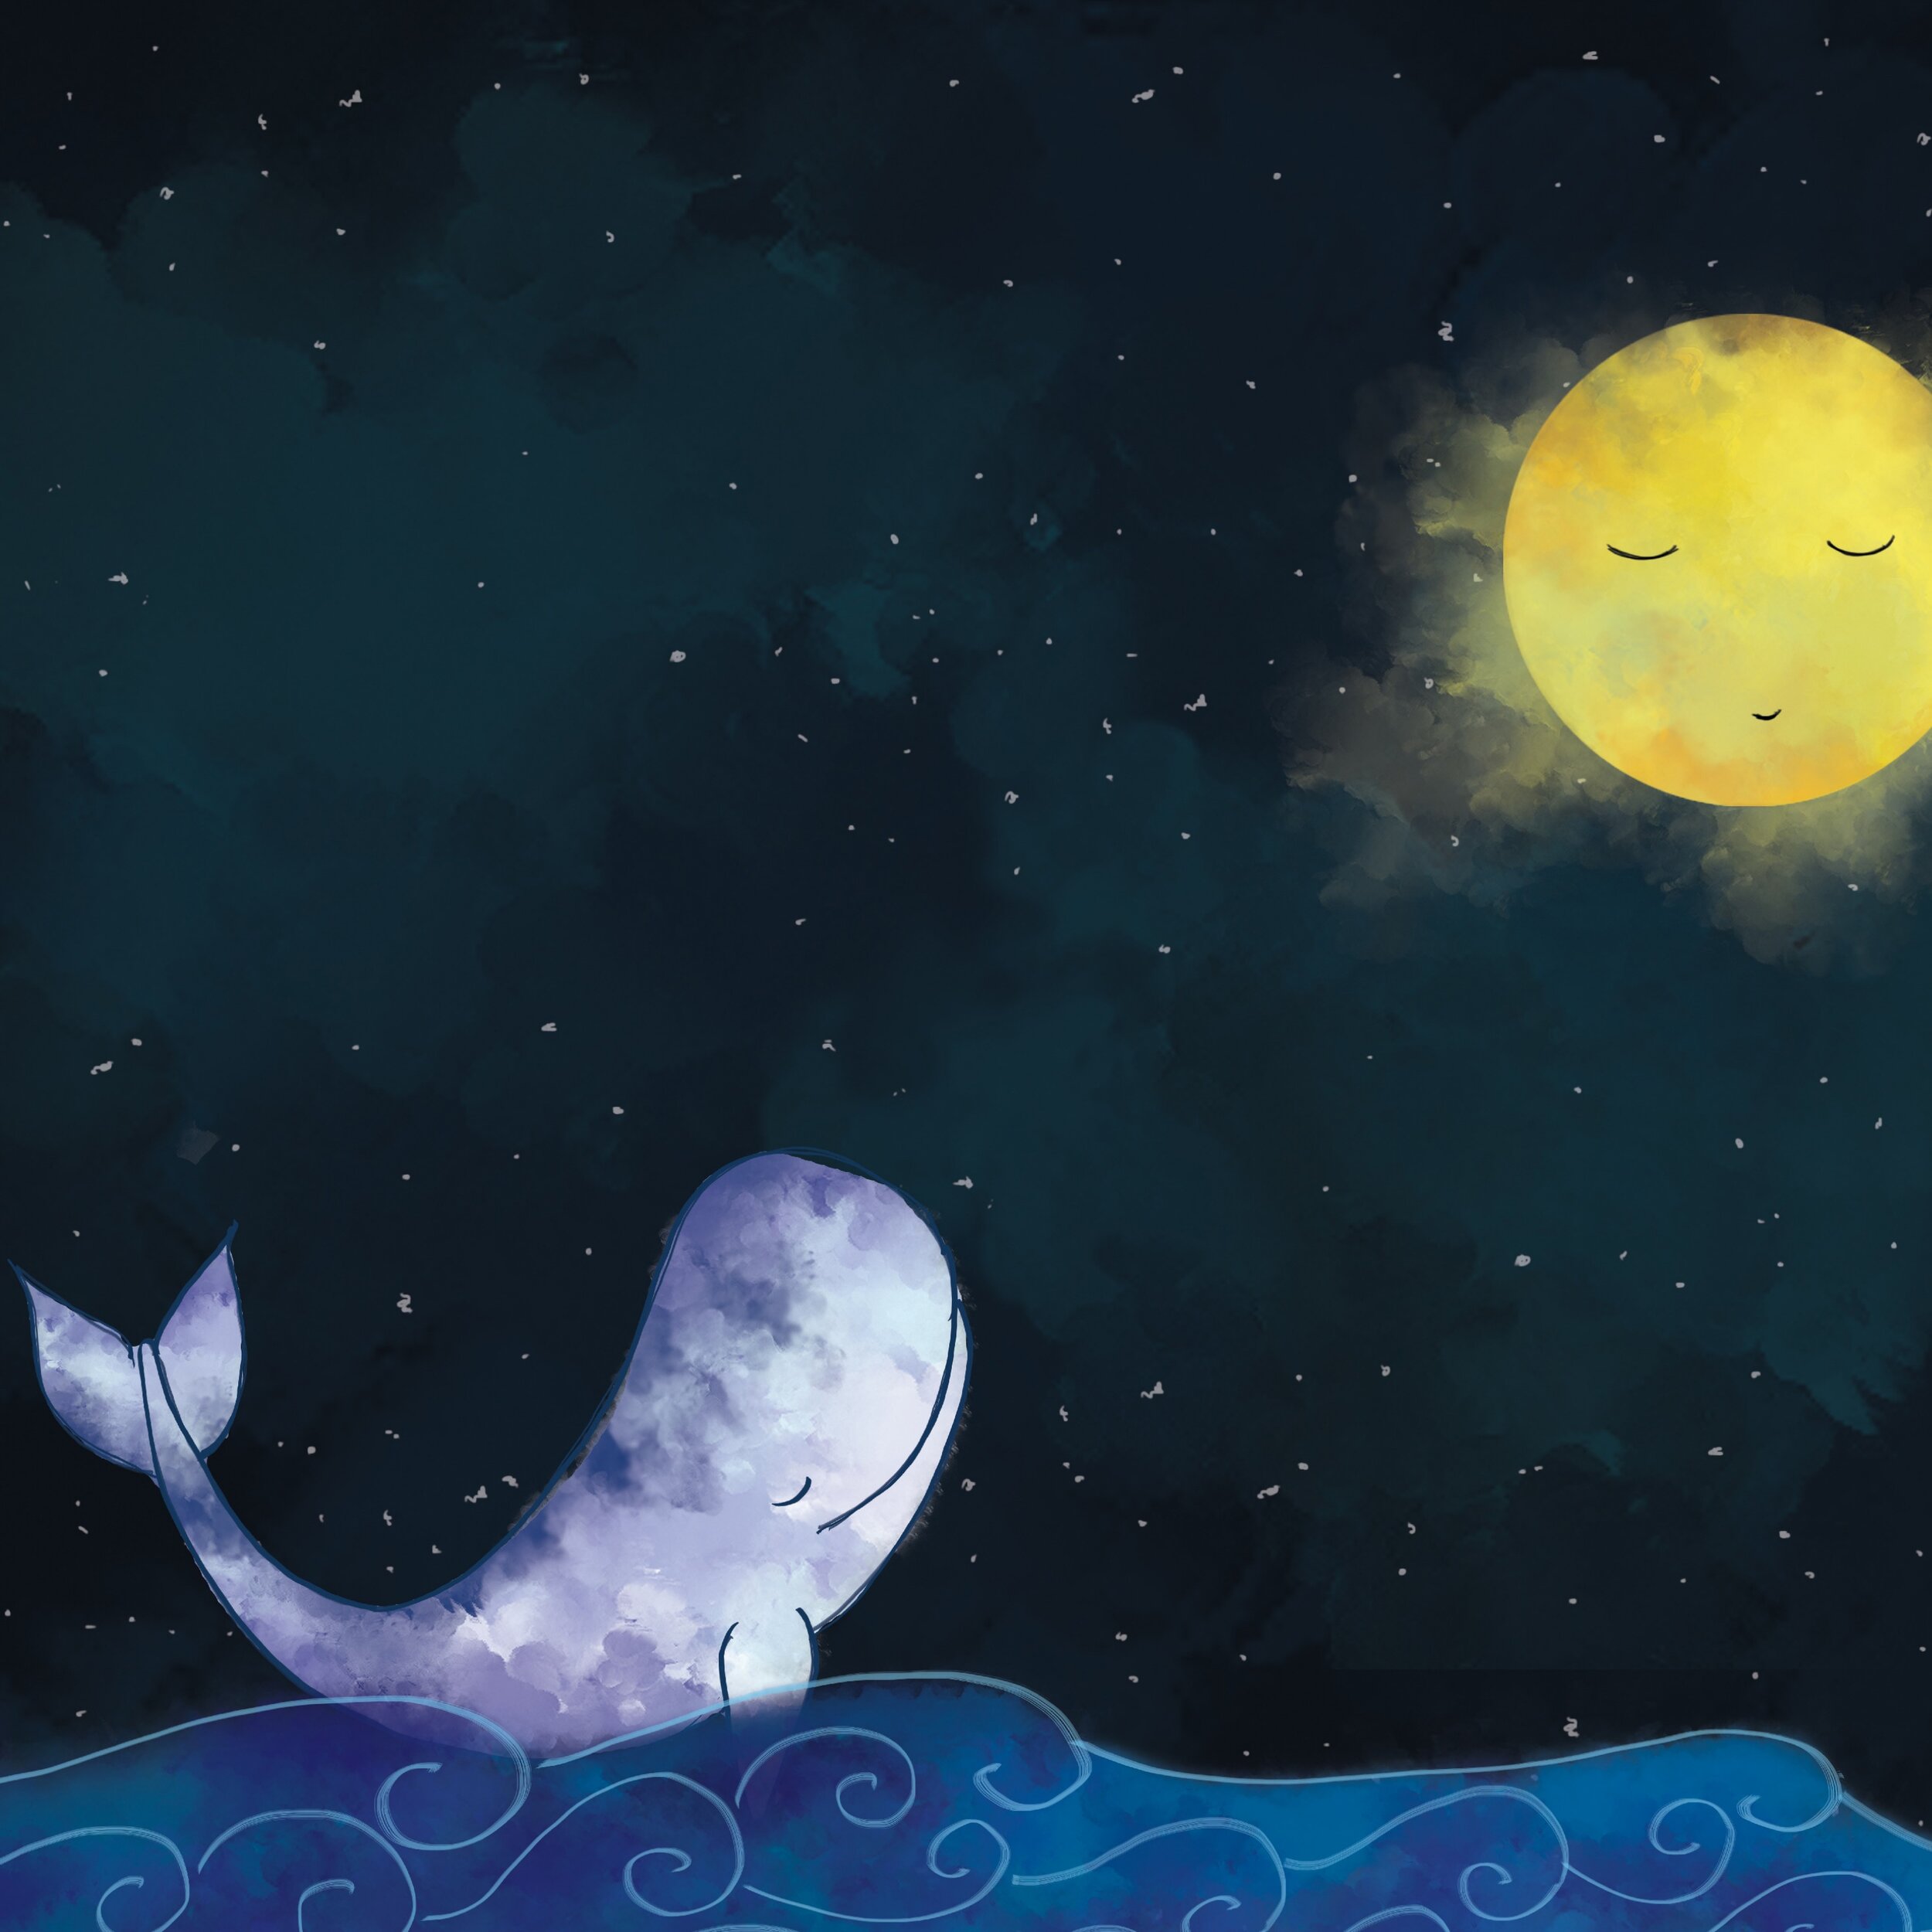 Whale In The Moon (Copy)